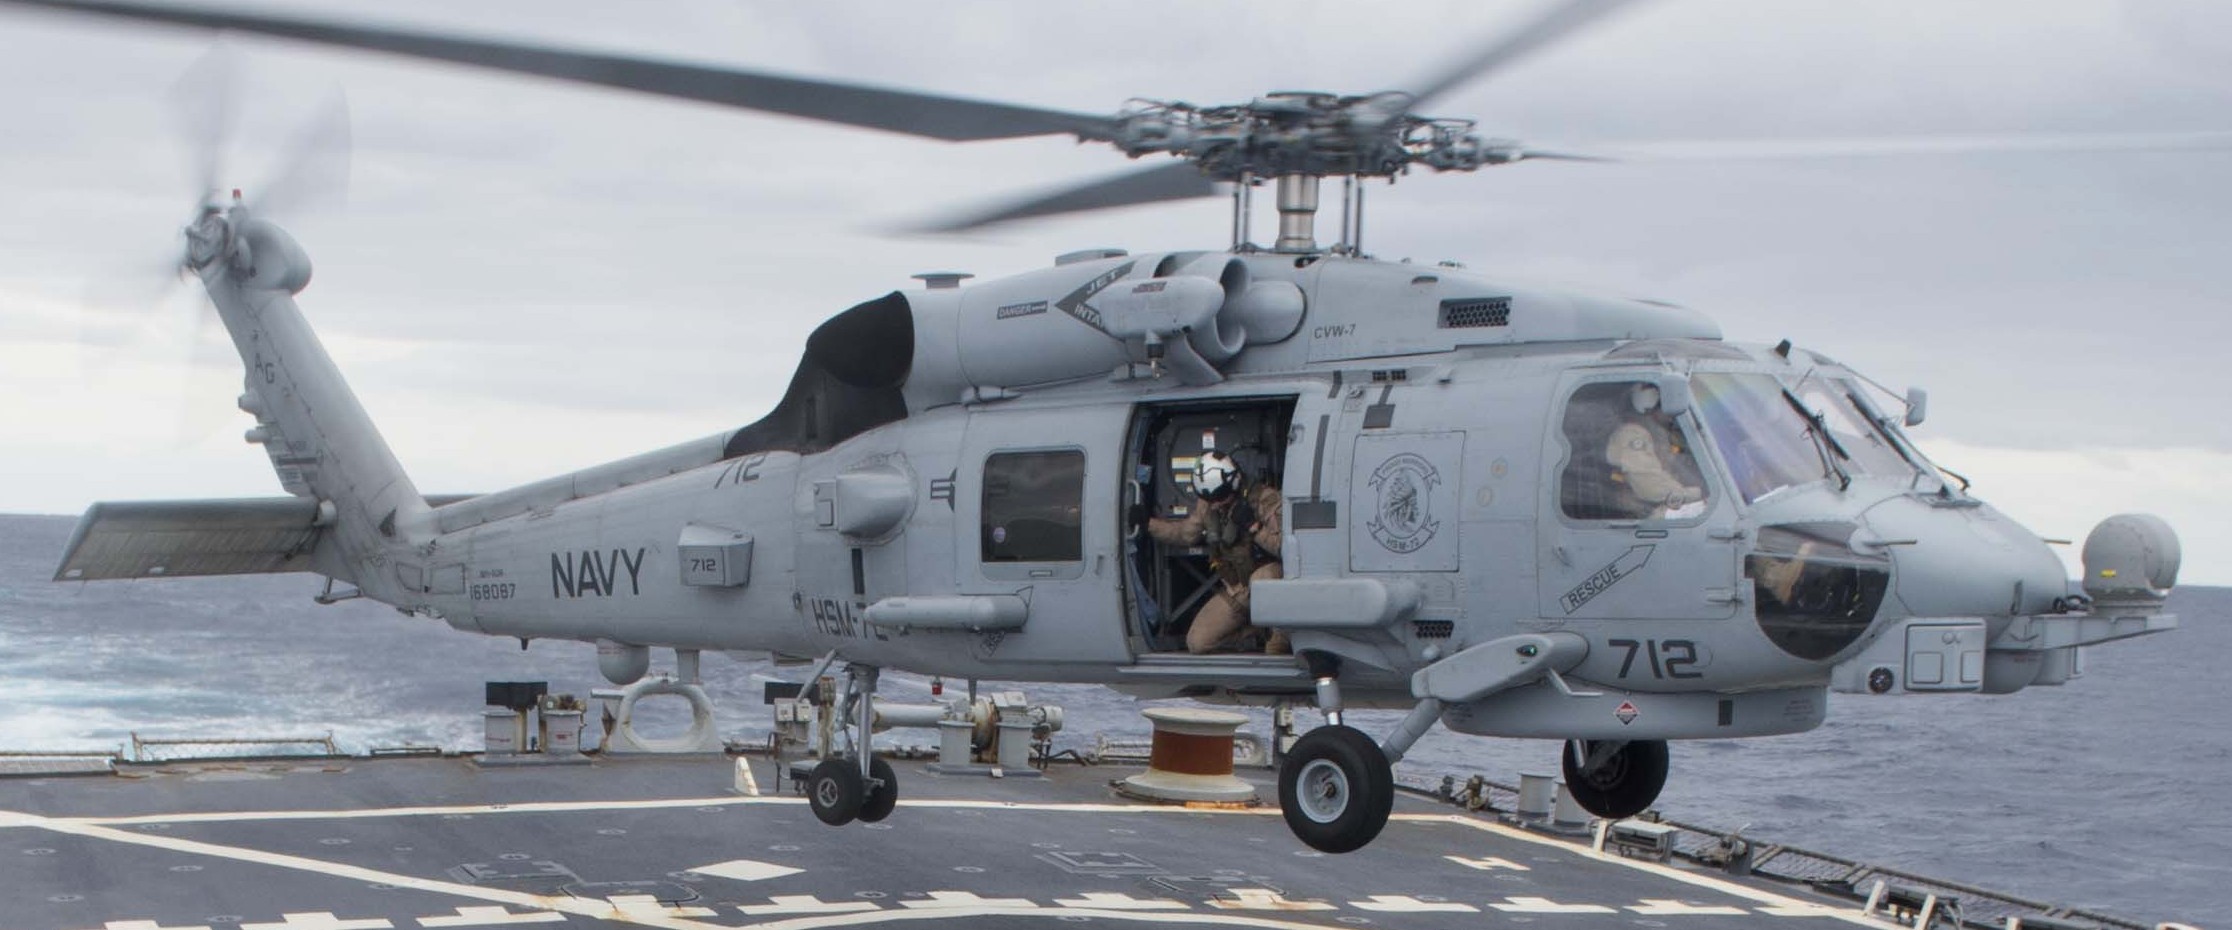 hsm-72 proud warriors helicopter maritime strike squadron mh-60r seahawk carrier air wing cvw-7 ddg-61 uss ramage 2015